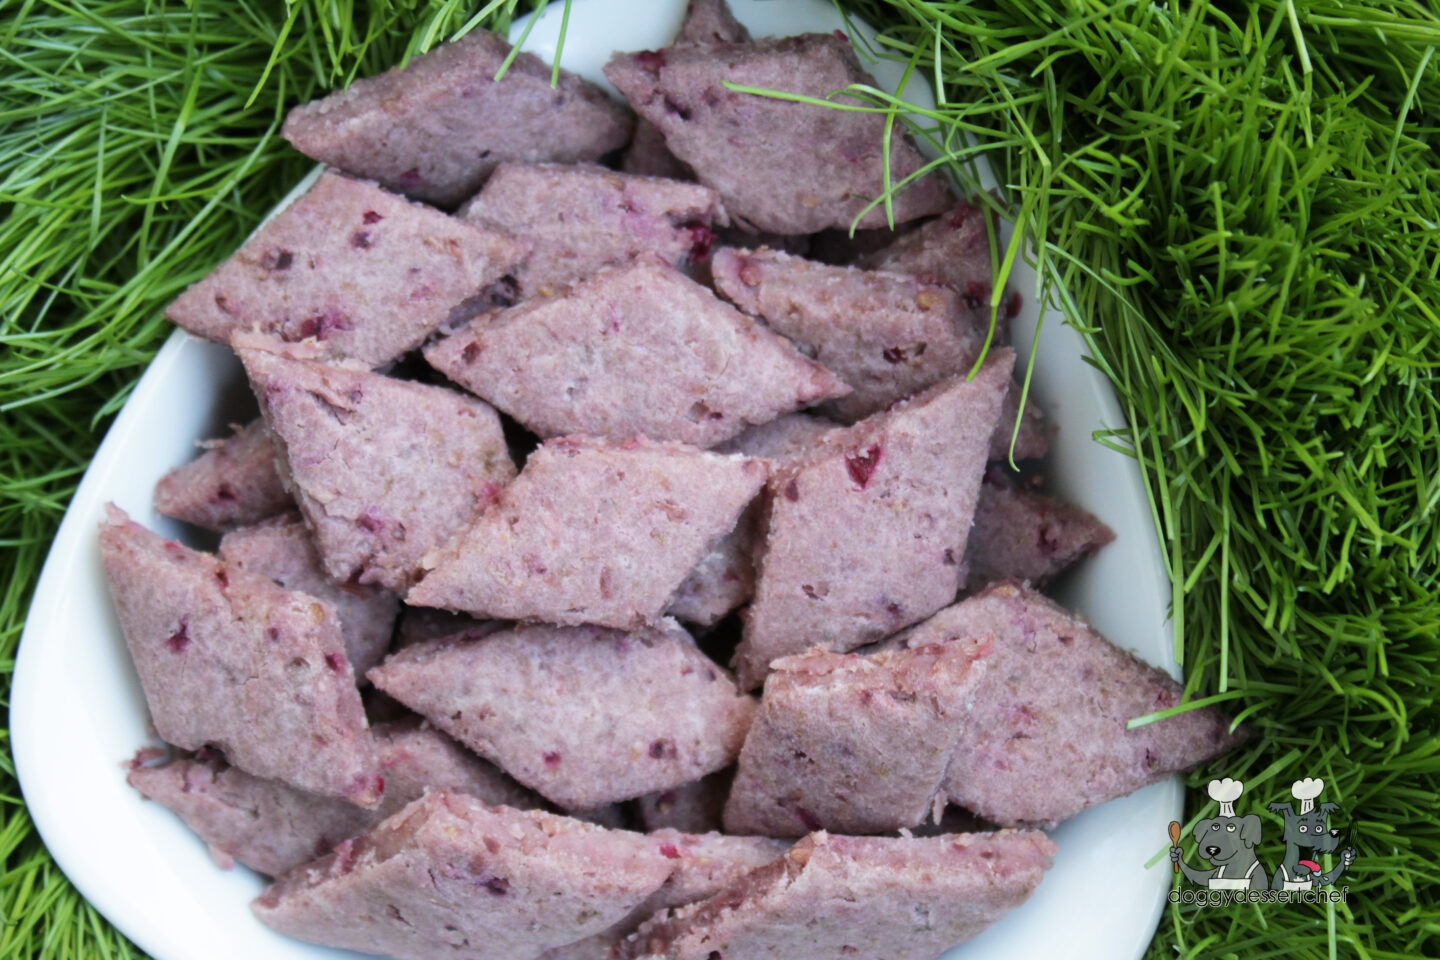 Brie and Blackberry Dog Treat Recipe